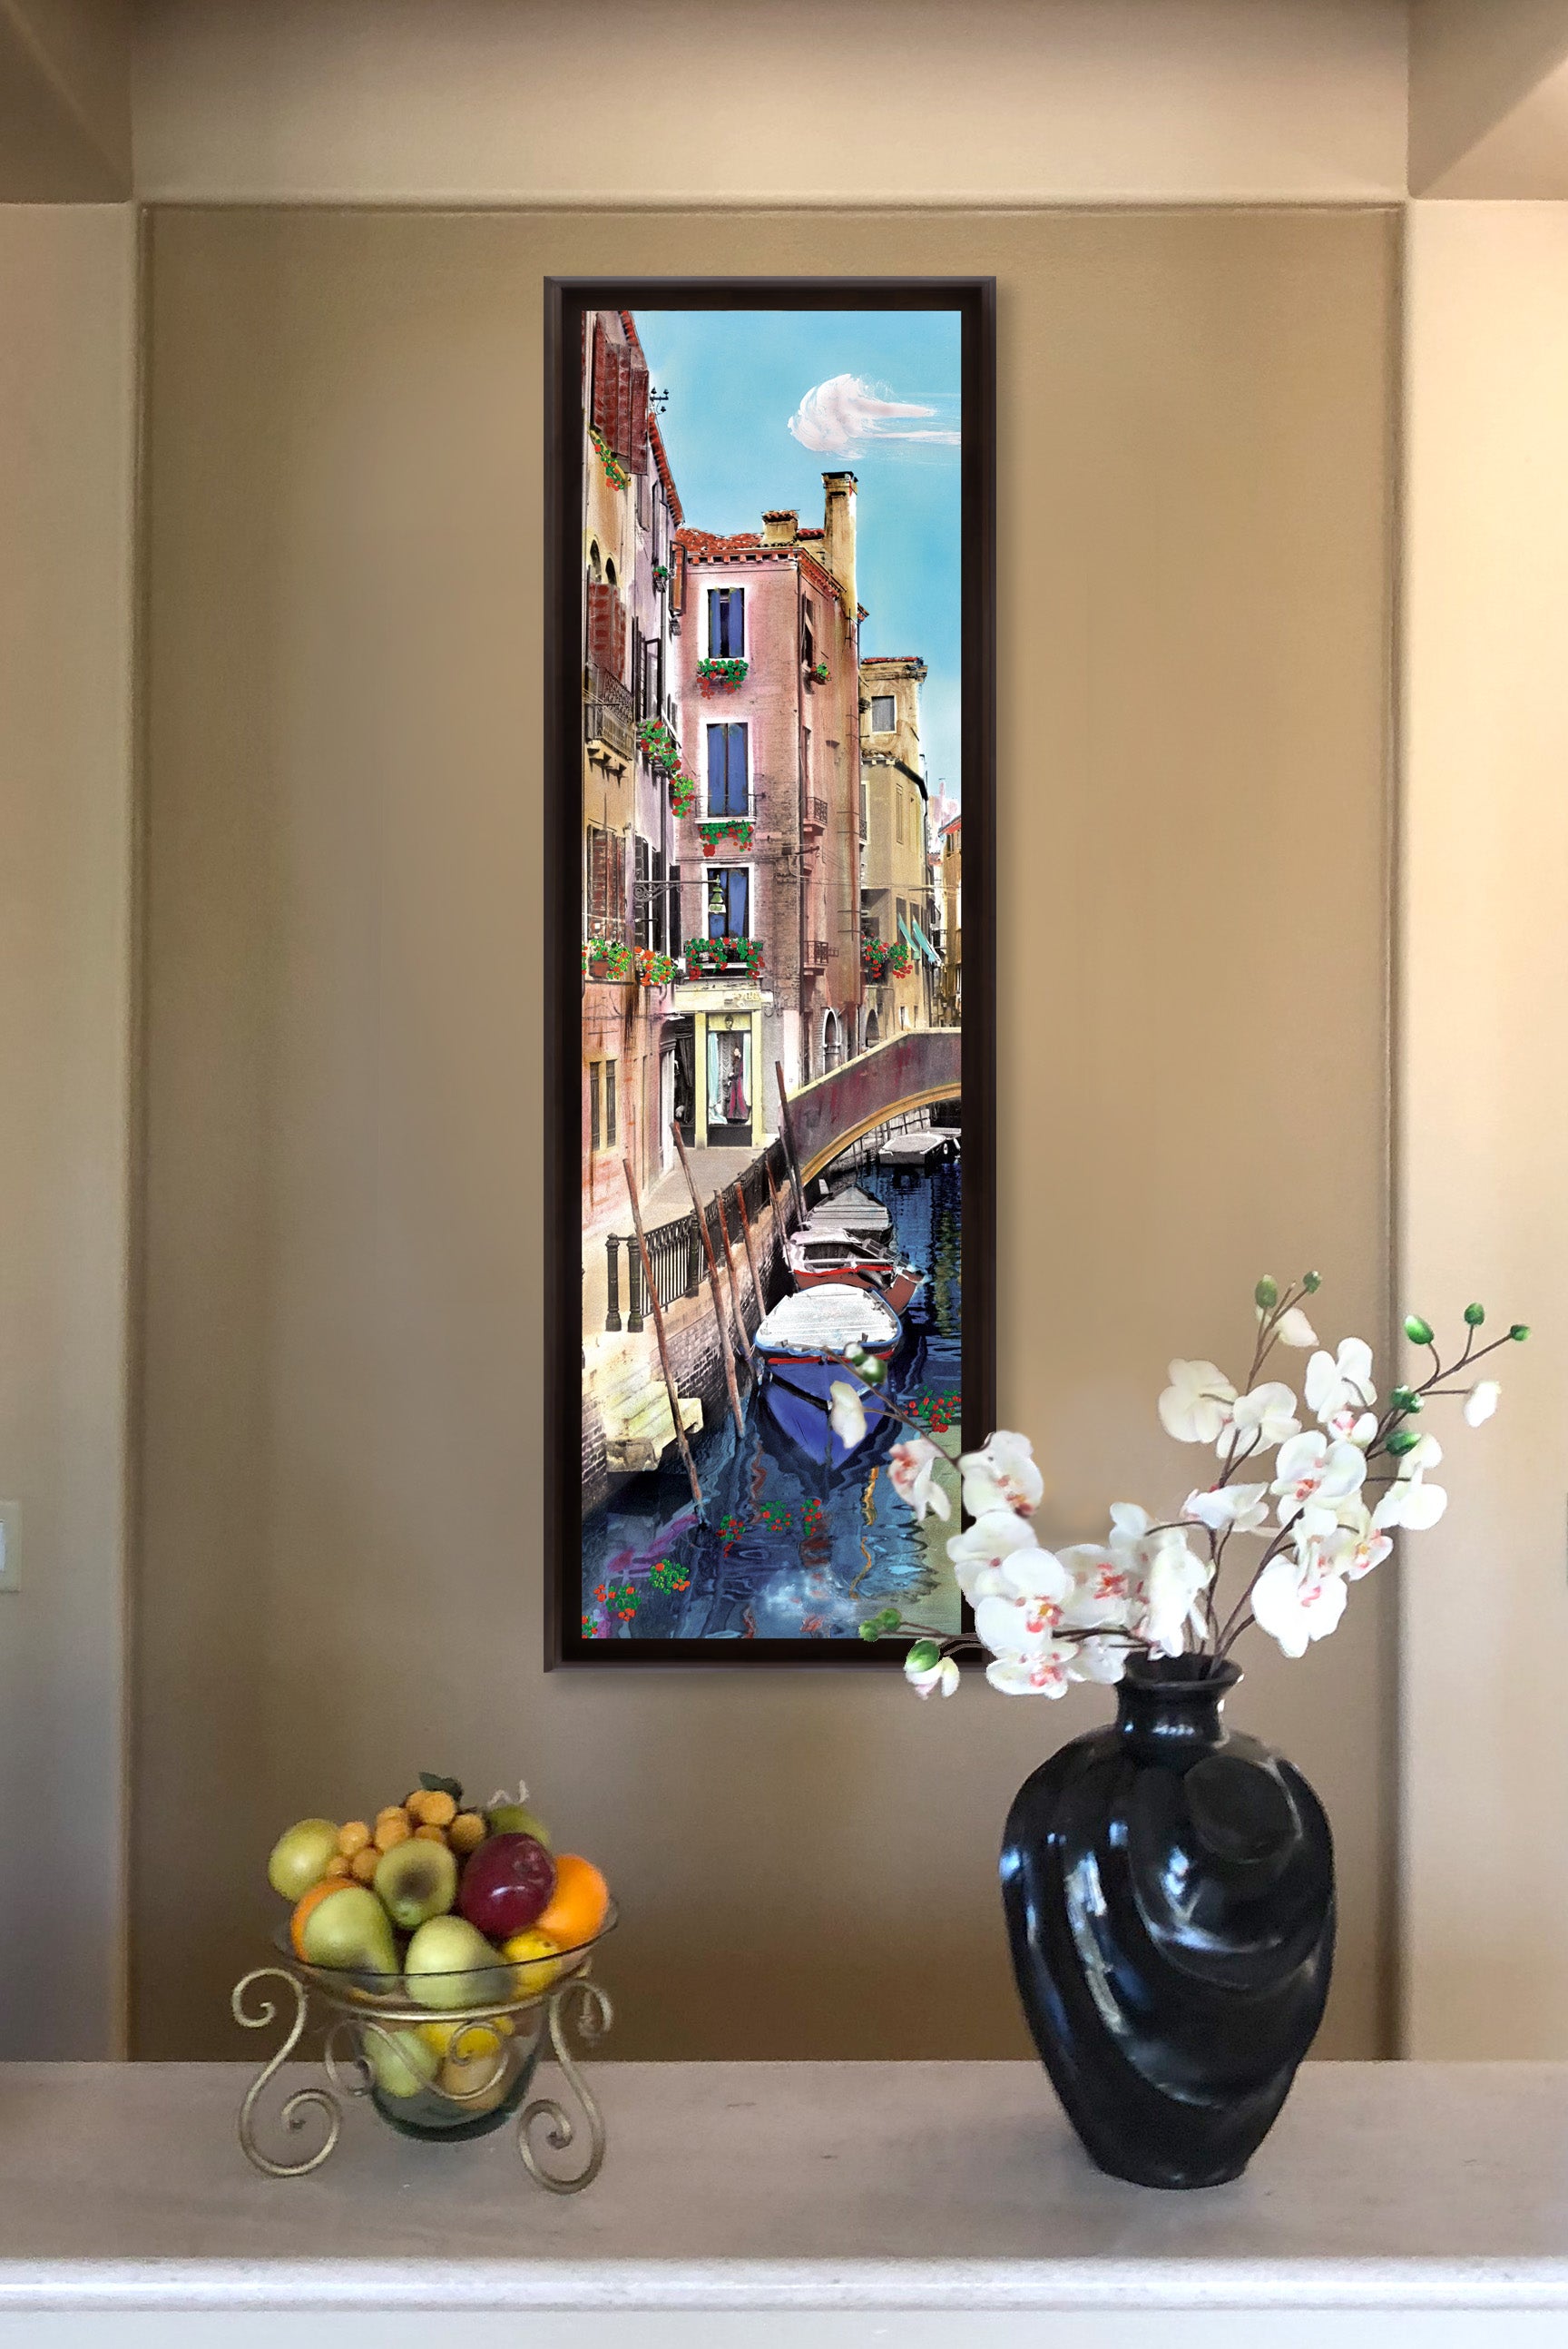 "Canal with Shop" TALL SKINNY CANVAS FRAMED PRINT "15 X 45"